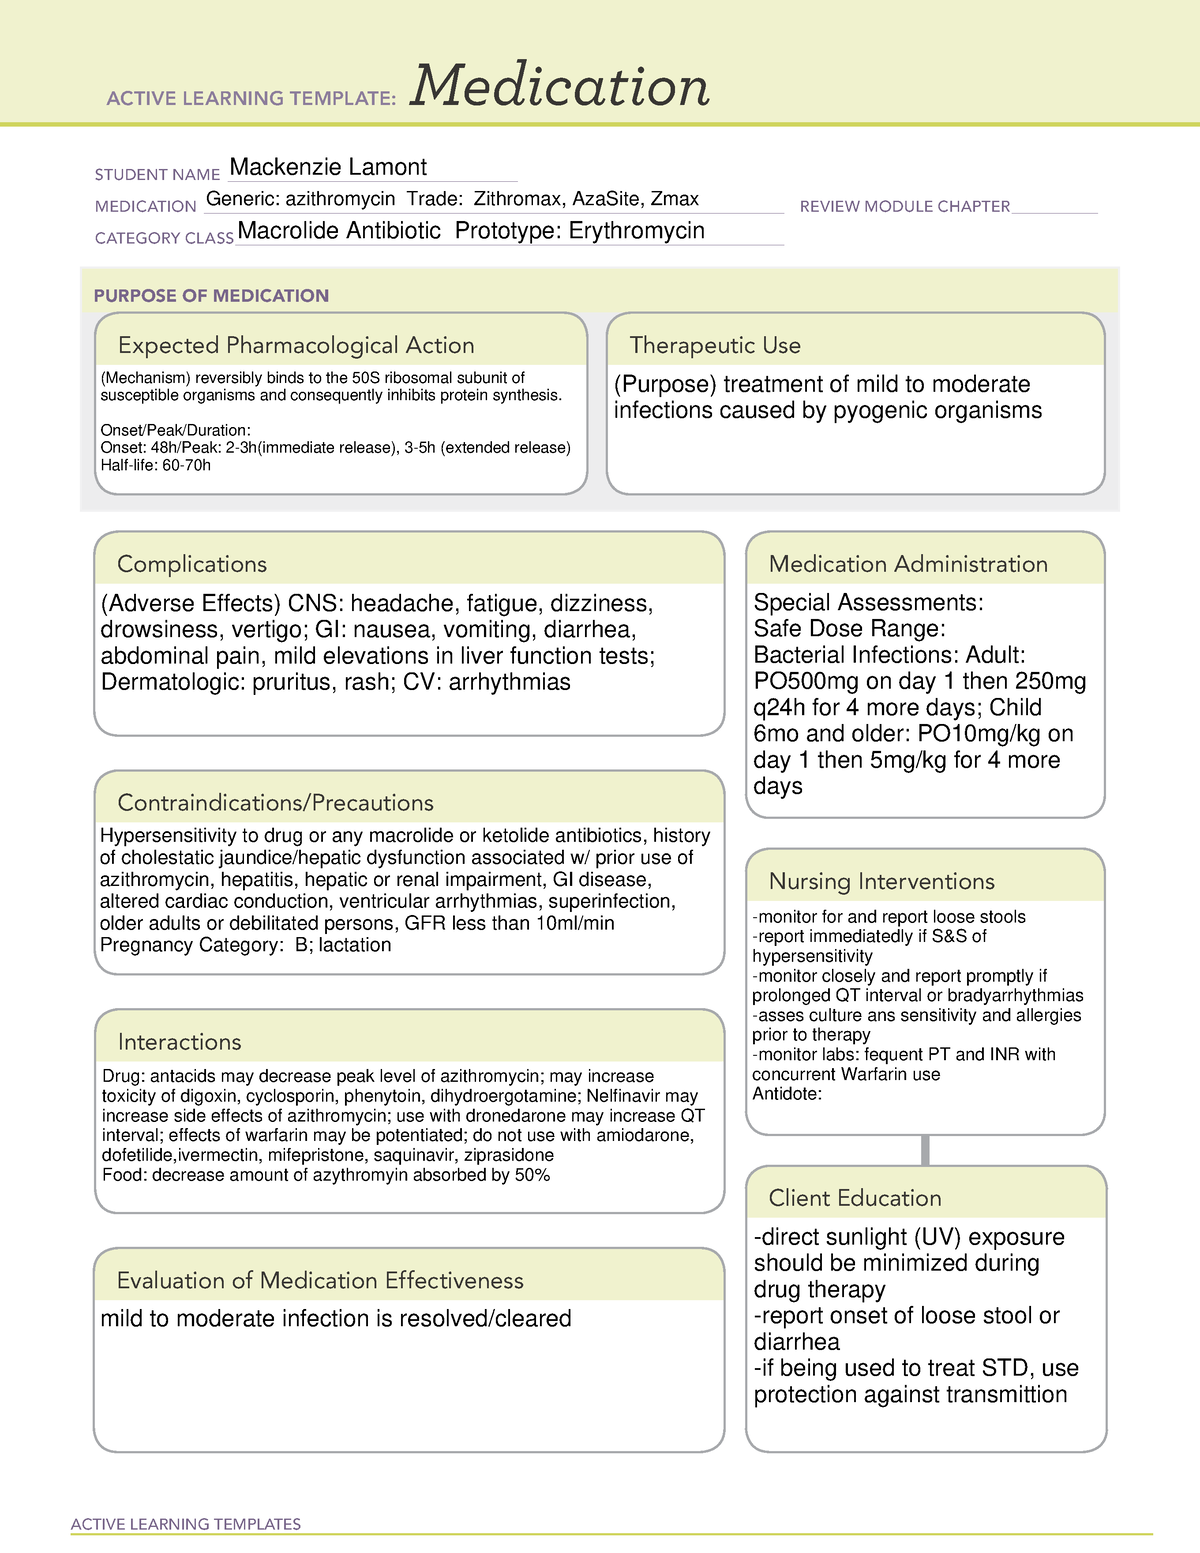 Azithromycin med template ACTIVE LEARNING TEMPLATES Medication